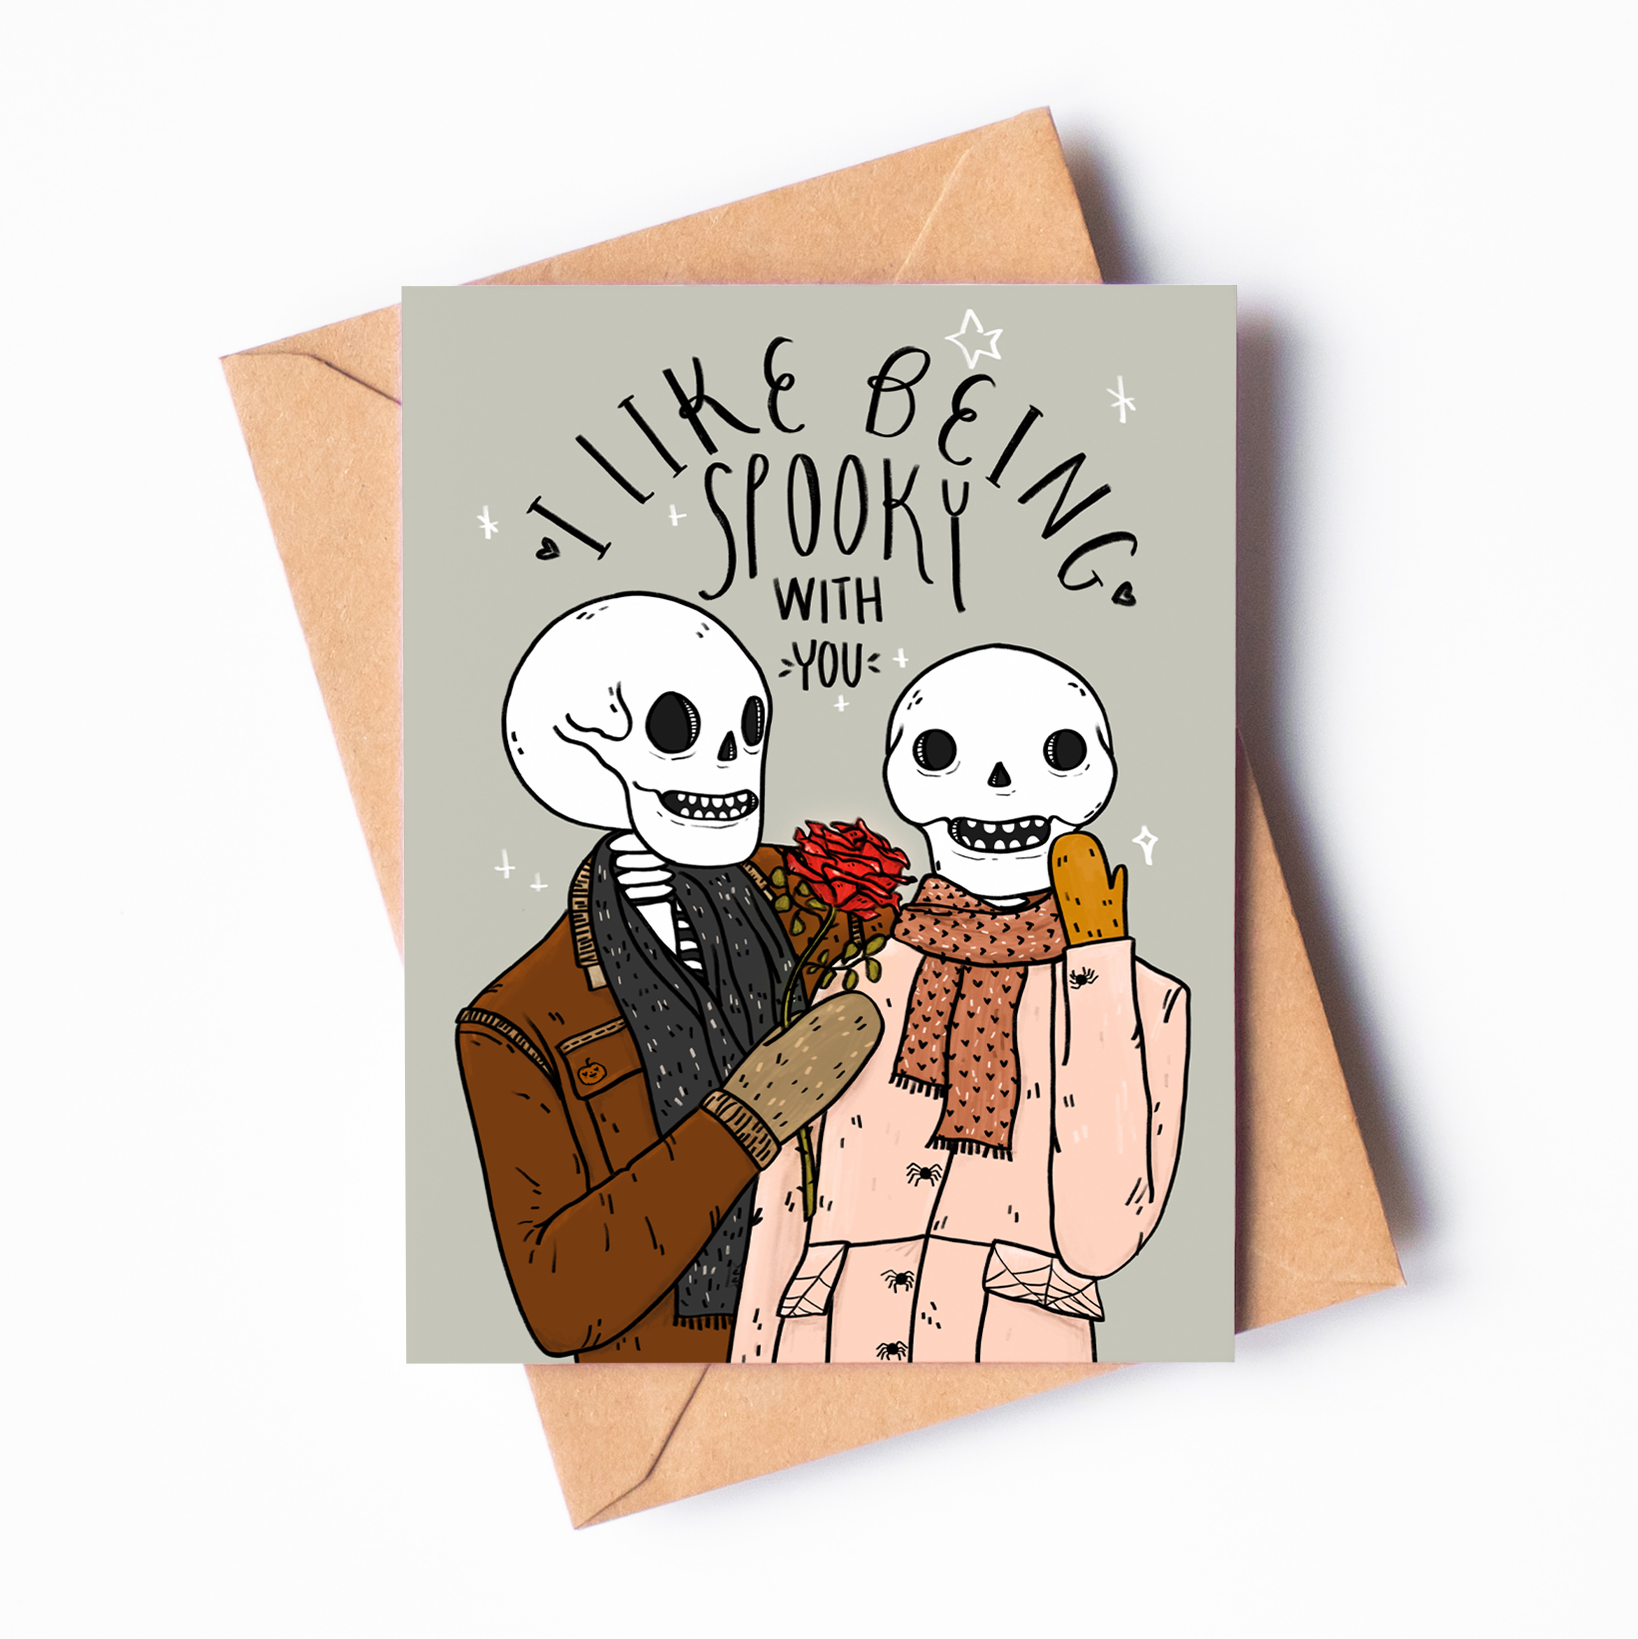 "I Like Being Spooky With You" - A2 Greeting Card